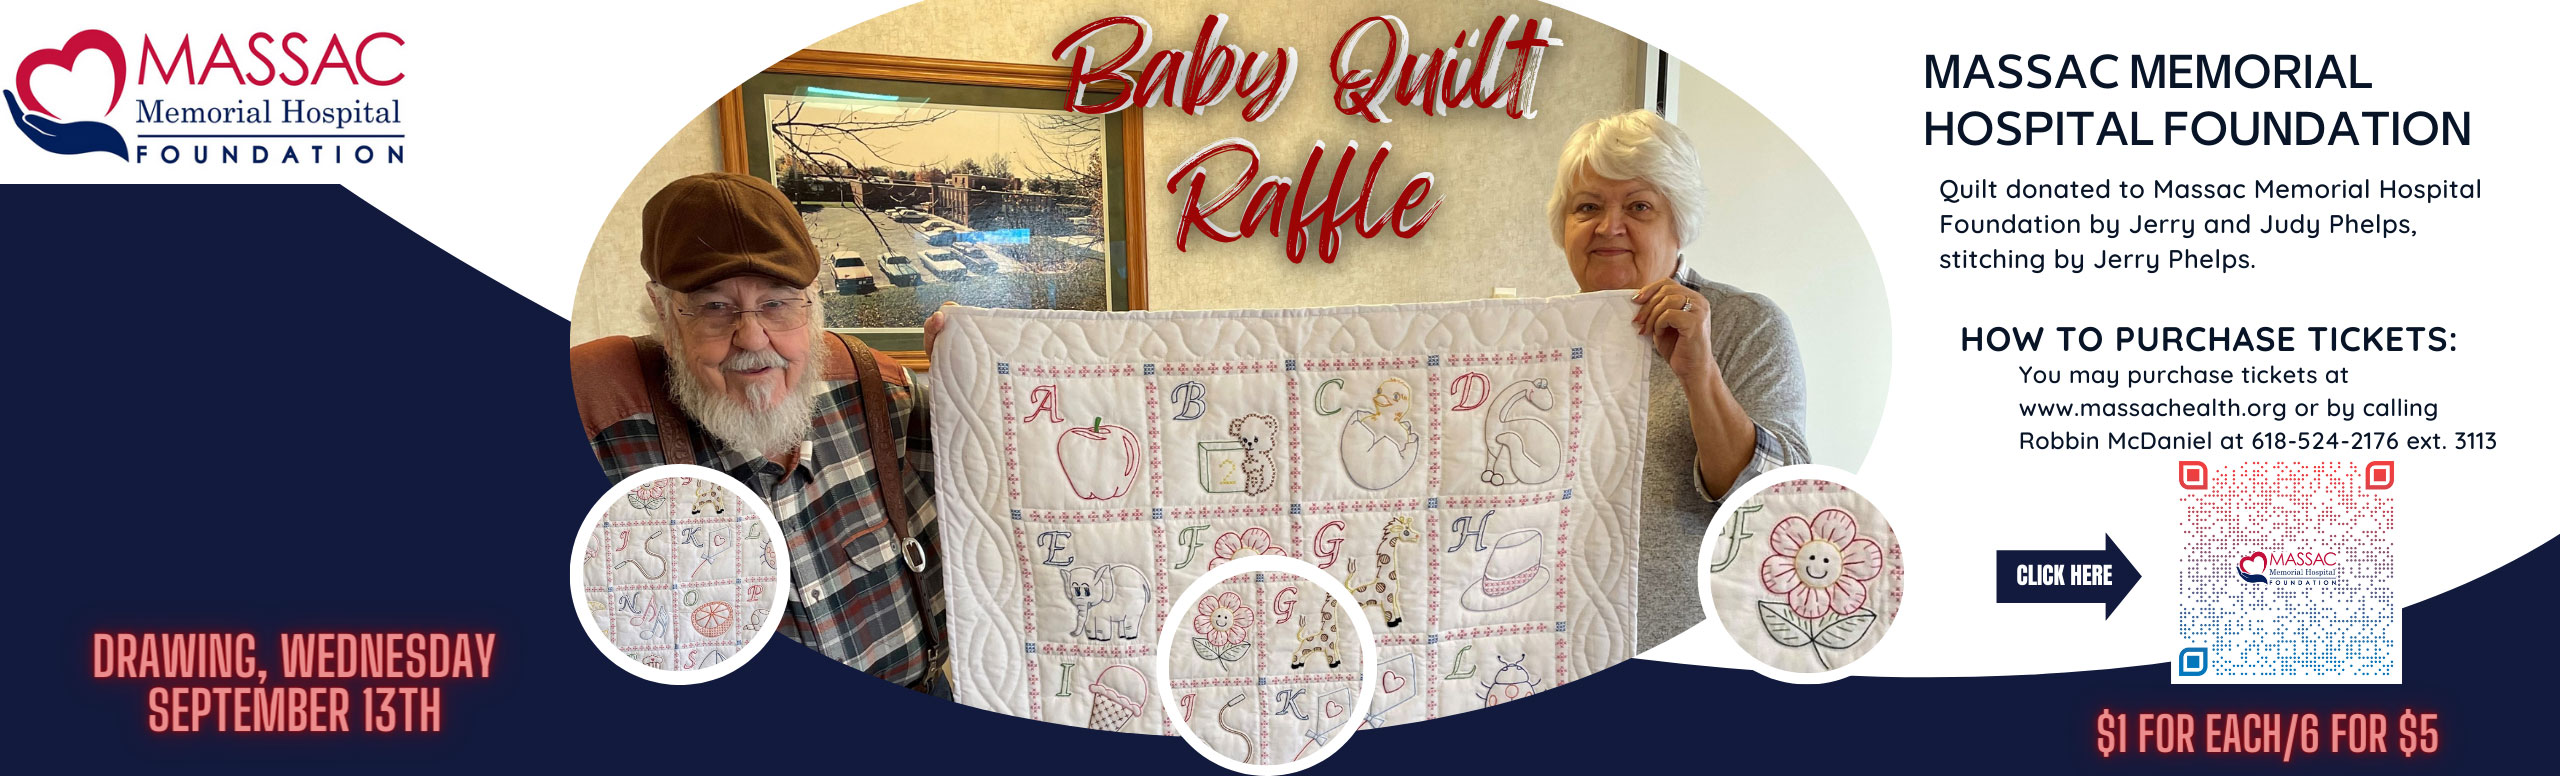 Baby quilt raffle picture of quilt and Jerry and Judy phelps